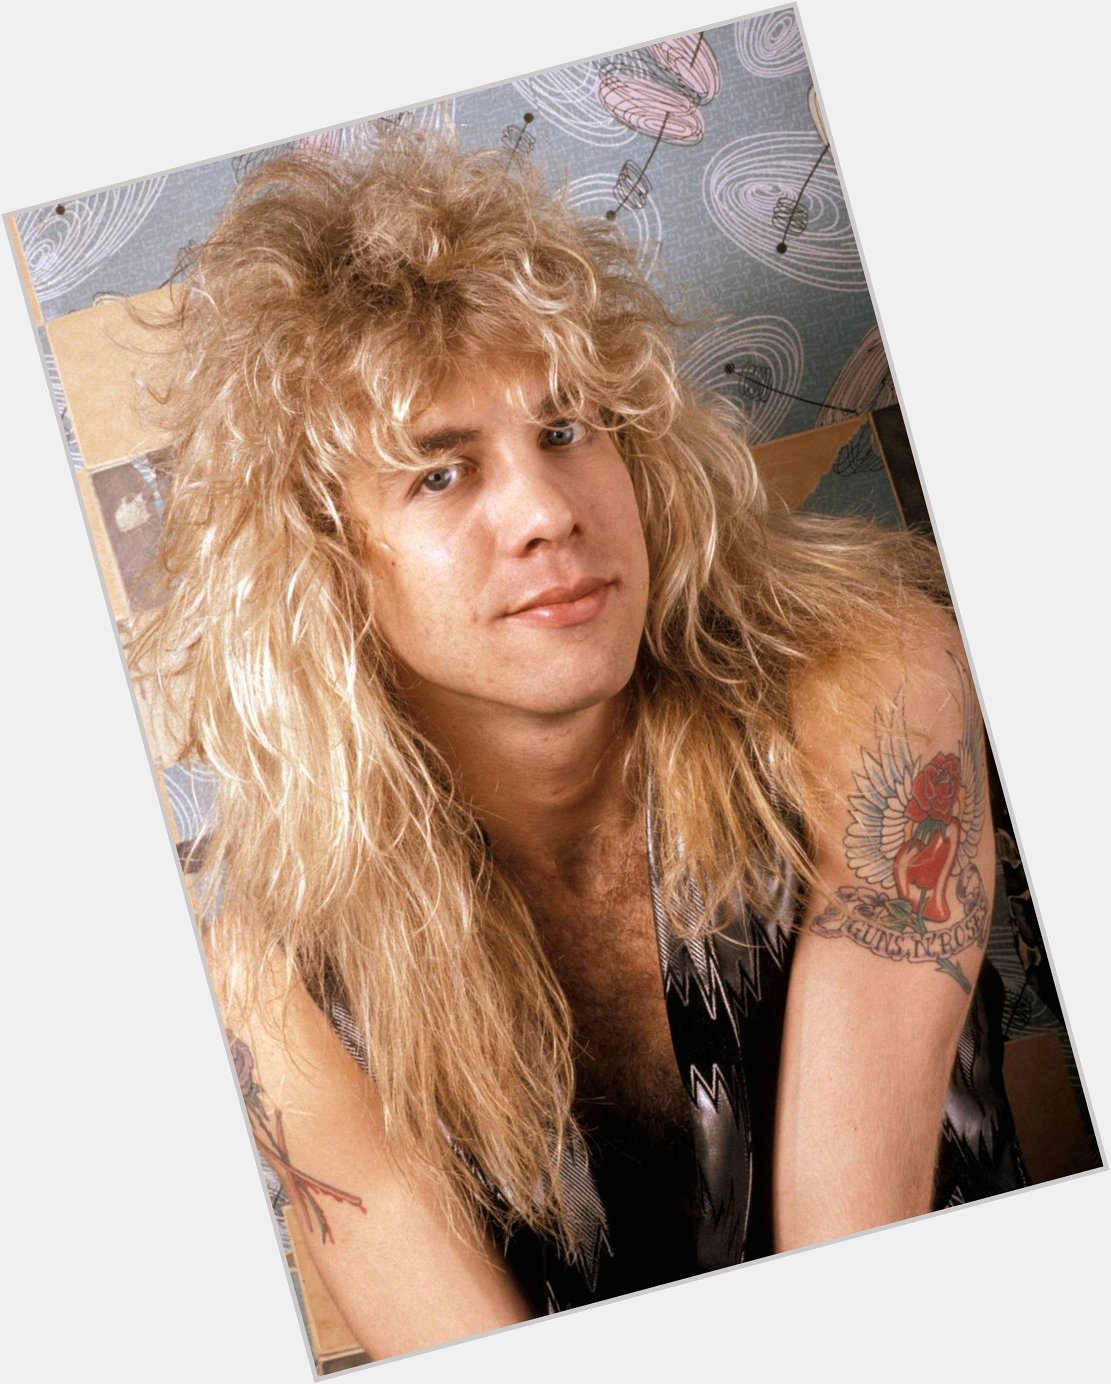 Happy Birthday to Guns N\ Roses drummer Steven Adler, born on this day in Cleveland, Ohio in 1965.    